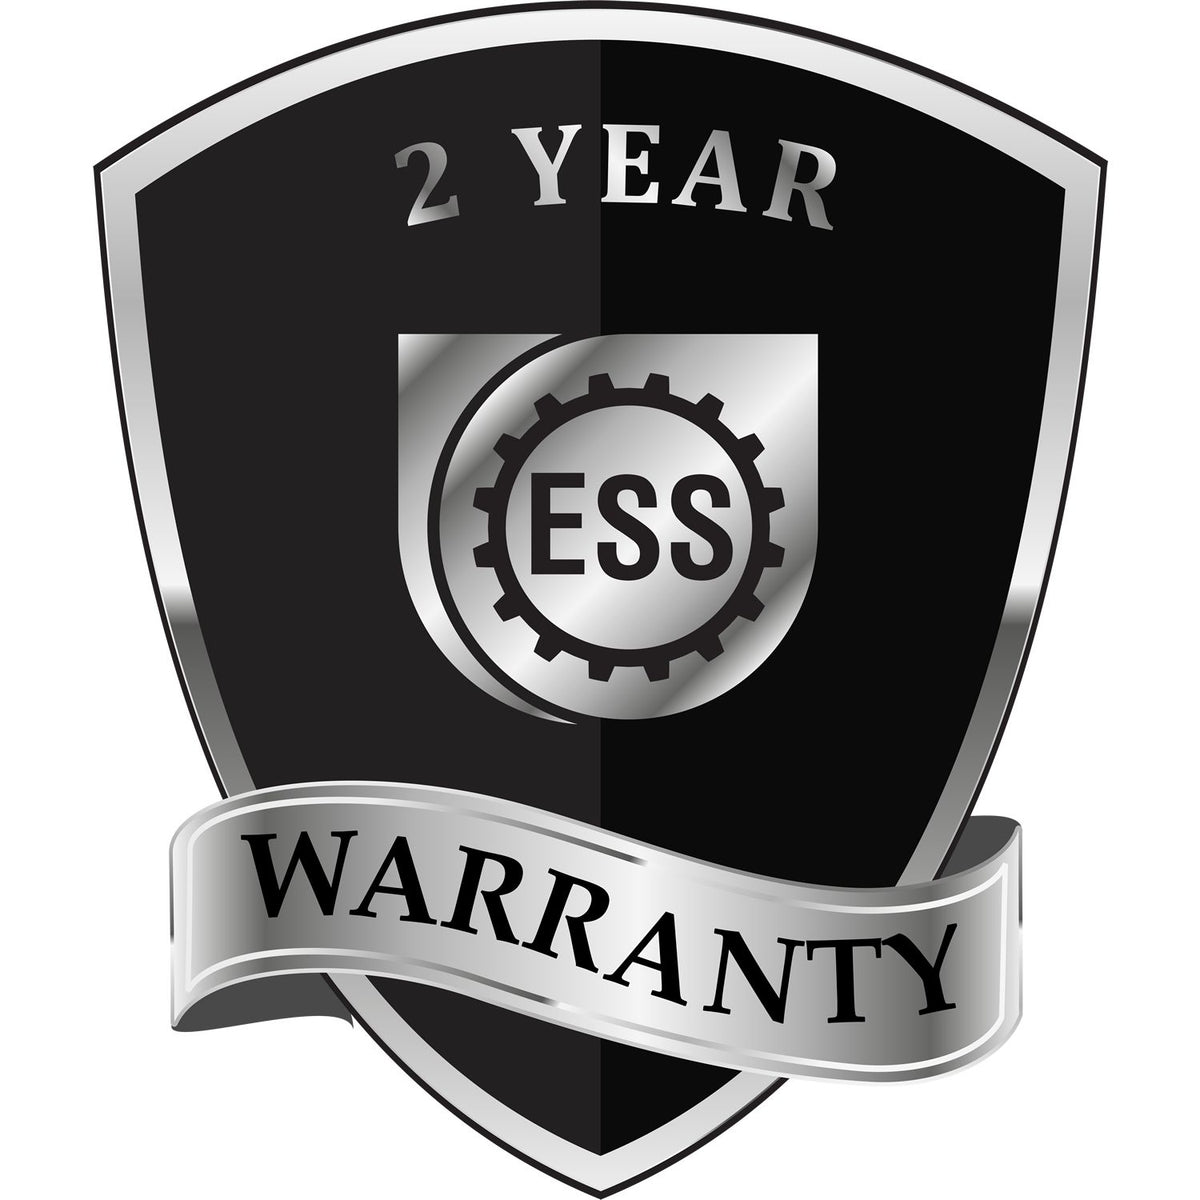 A badge or emblem showing a warranty icon for the Heavy Duty Cast Iron Tennessee Architect Embosser